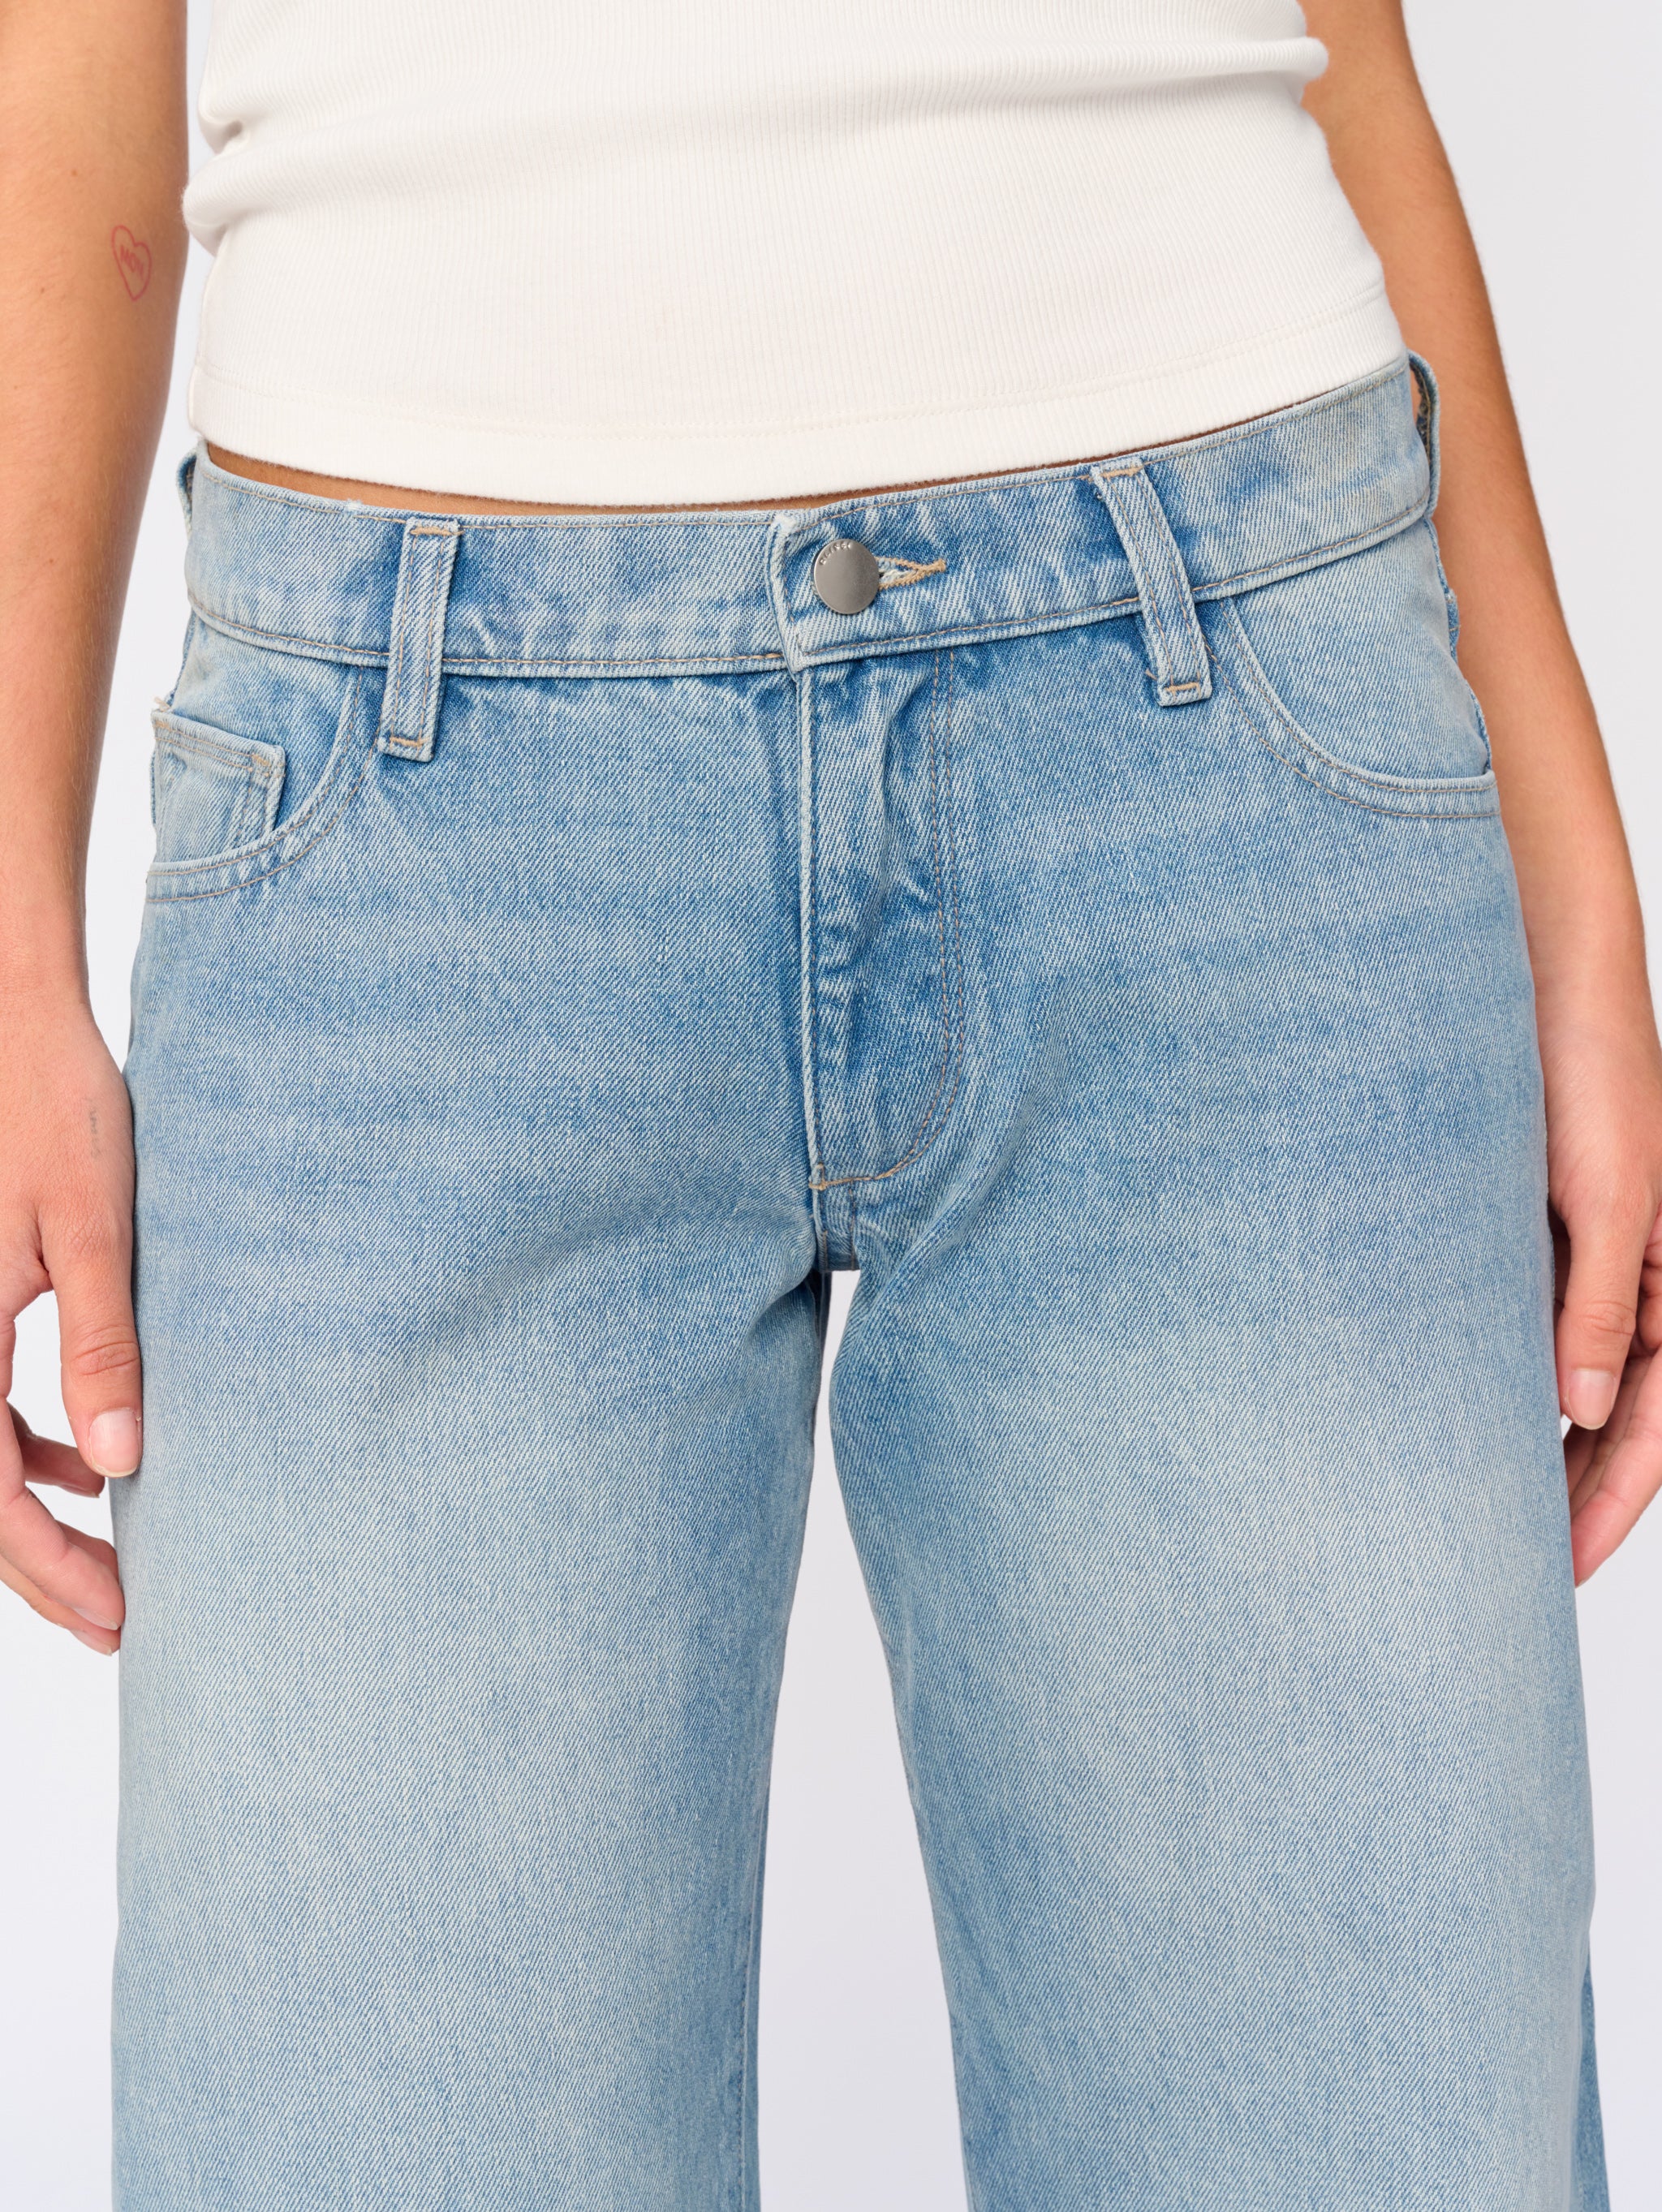 Bea Barrel Relaxed Vintage Jeans | Daydream